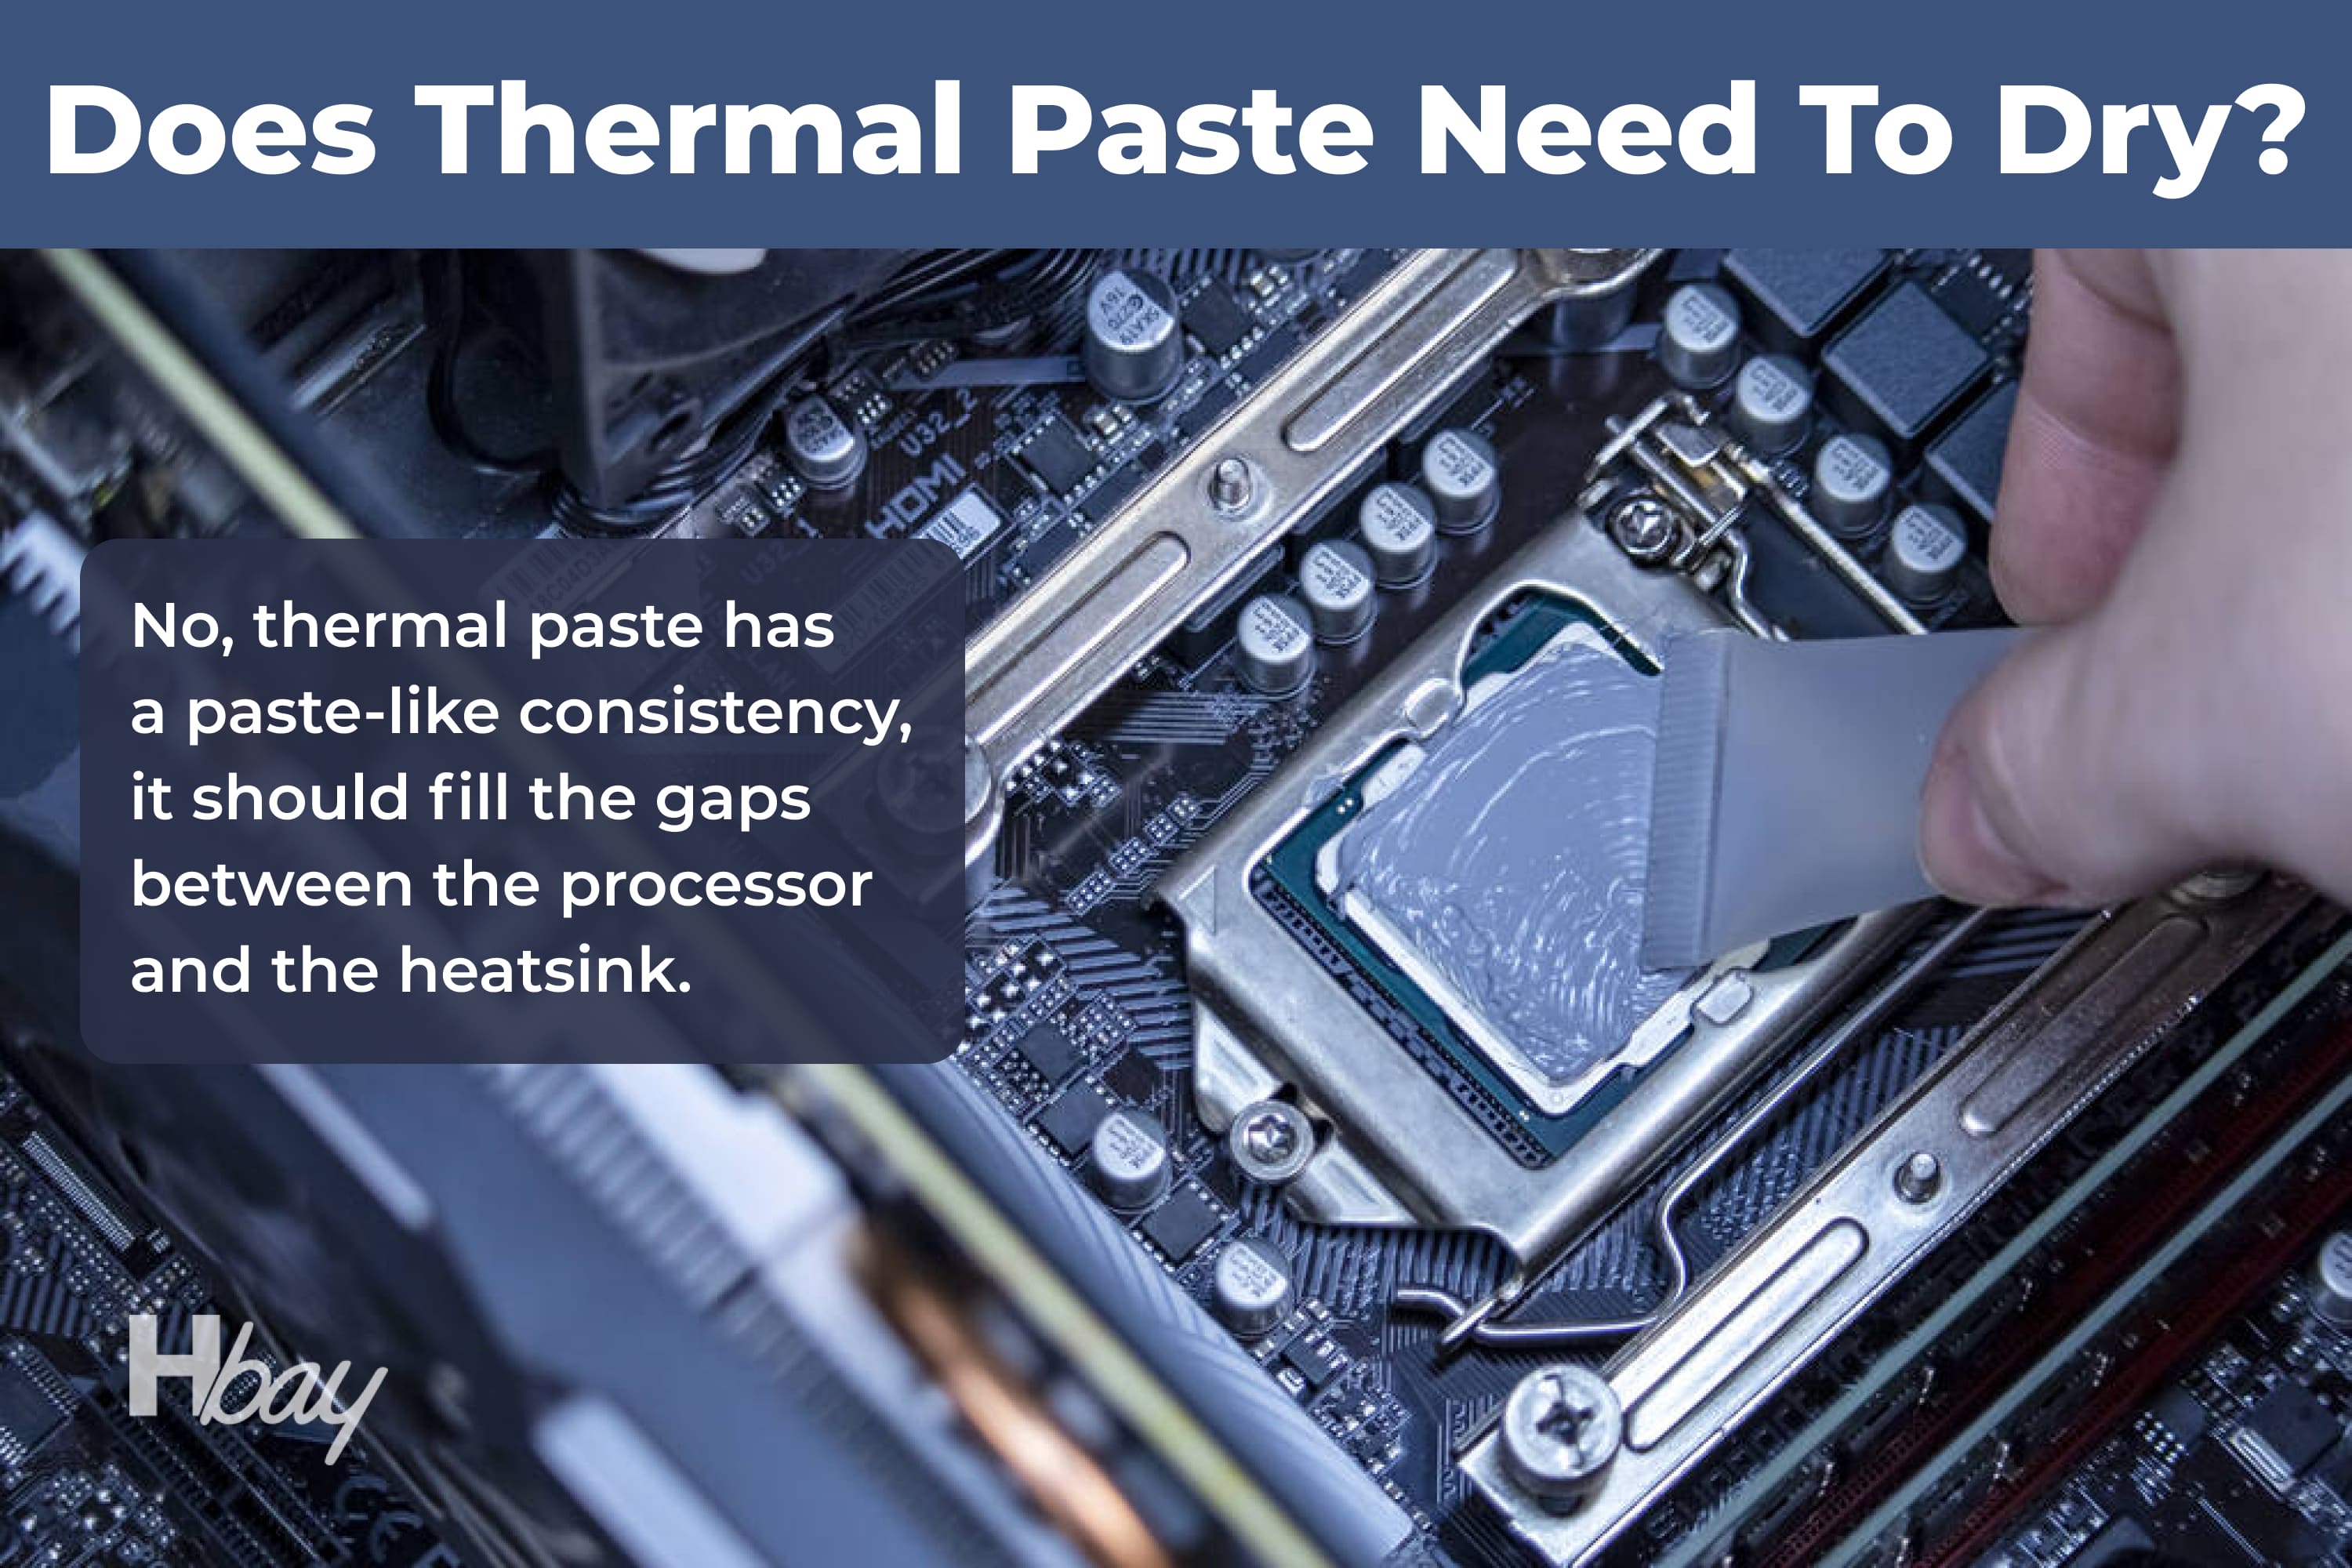 How Long Does It Take For Thermal Paste to Dry